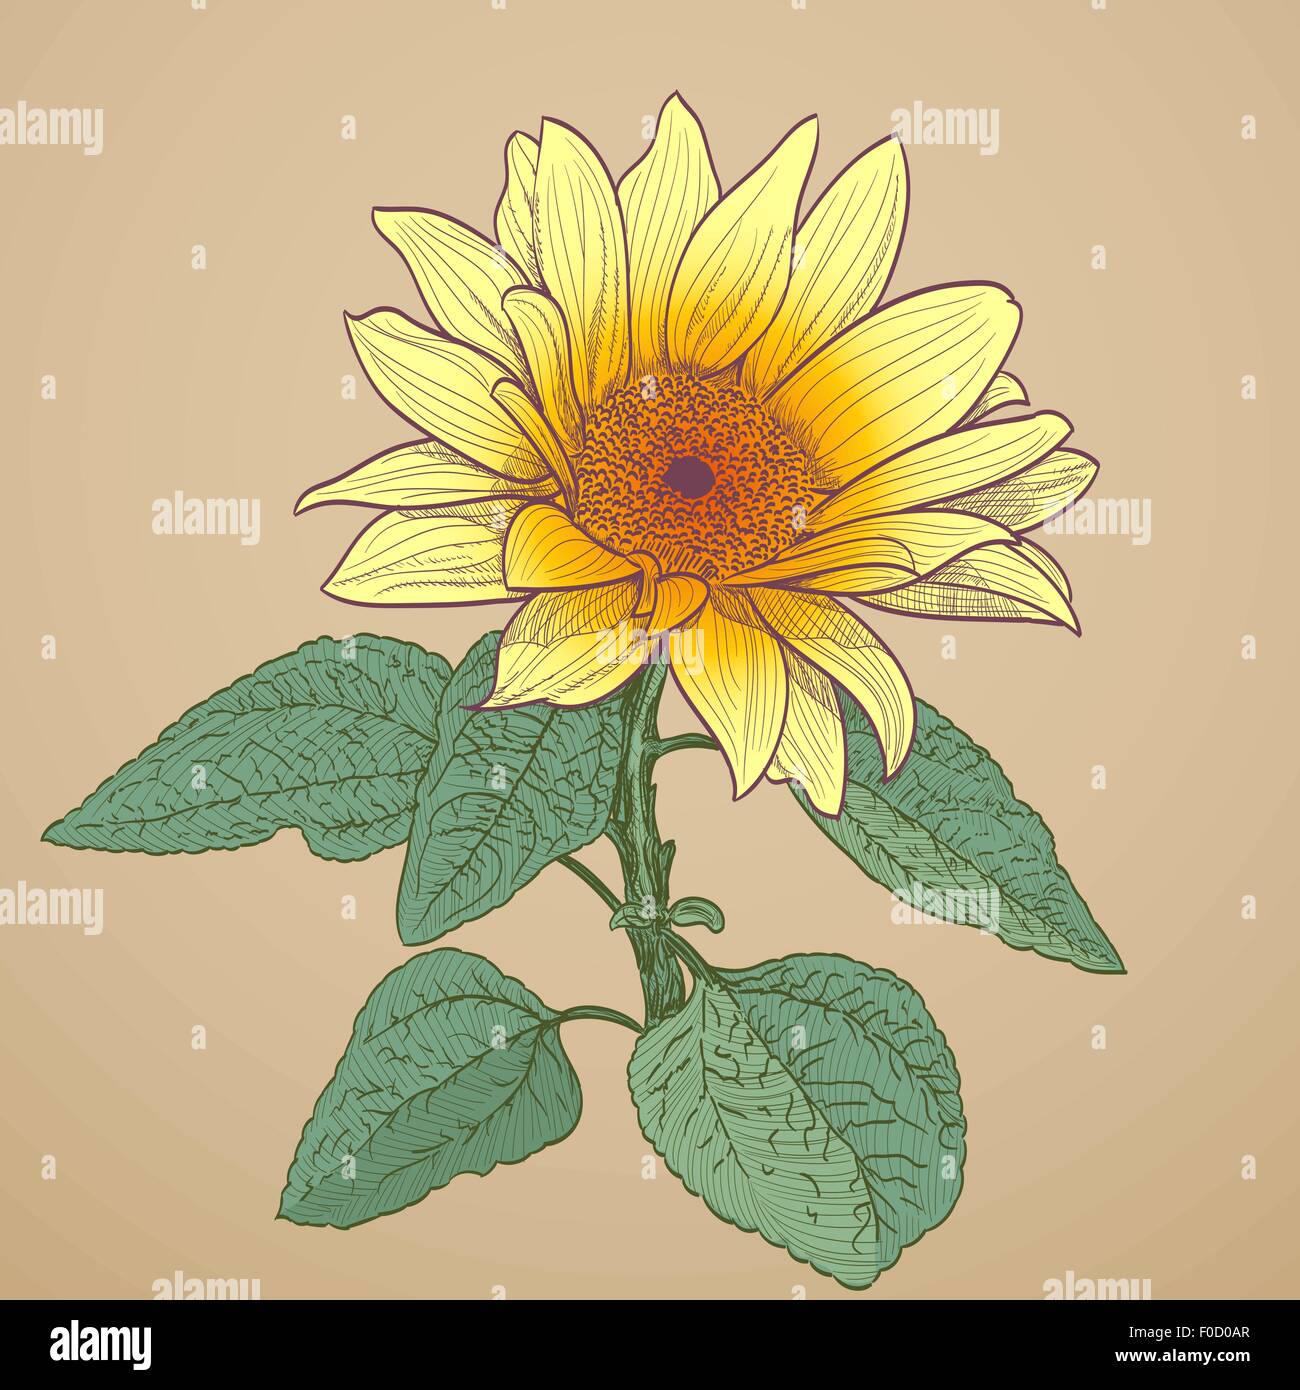 How To Draw A Funny Summer Sunflower 